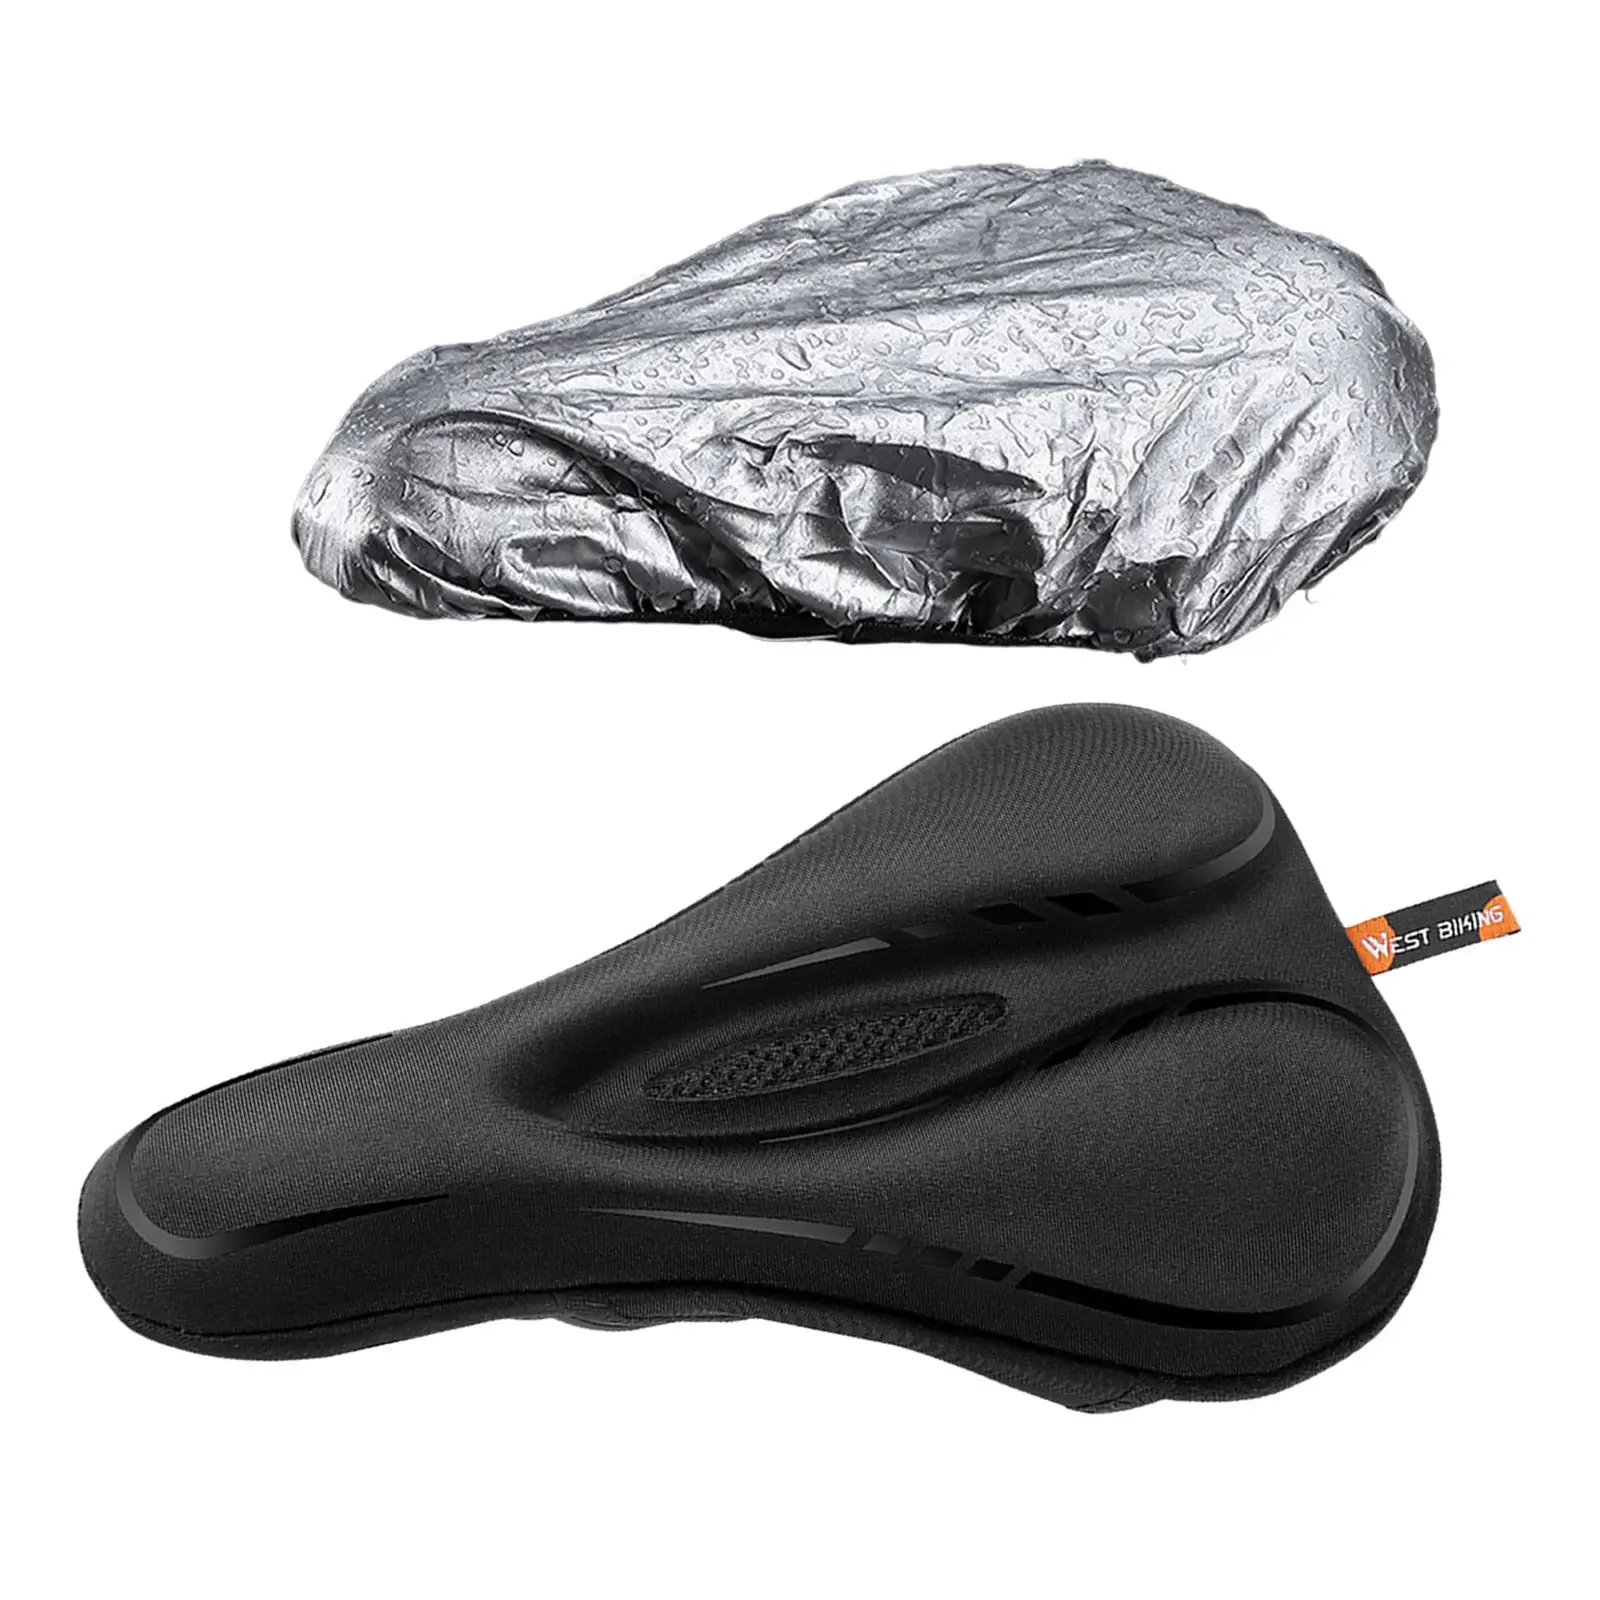 Comfortable Bike Saddle Cushion Pad Non Slip Rain Cover Storage Shockproof Breathable for Mountain Road Bike Cycling Accessories